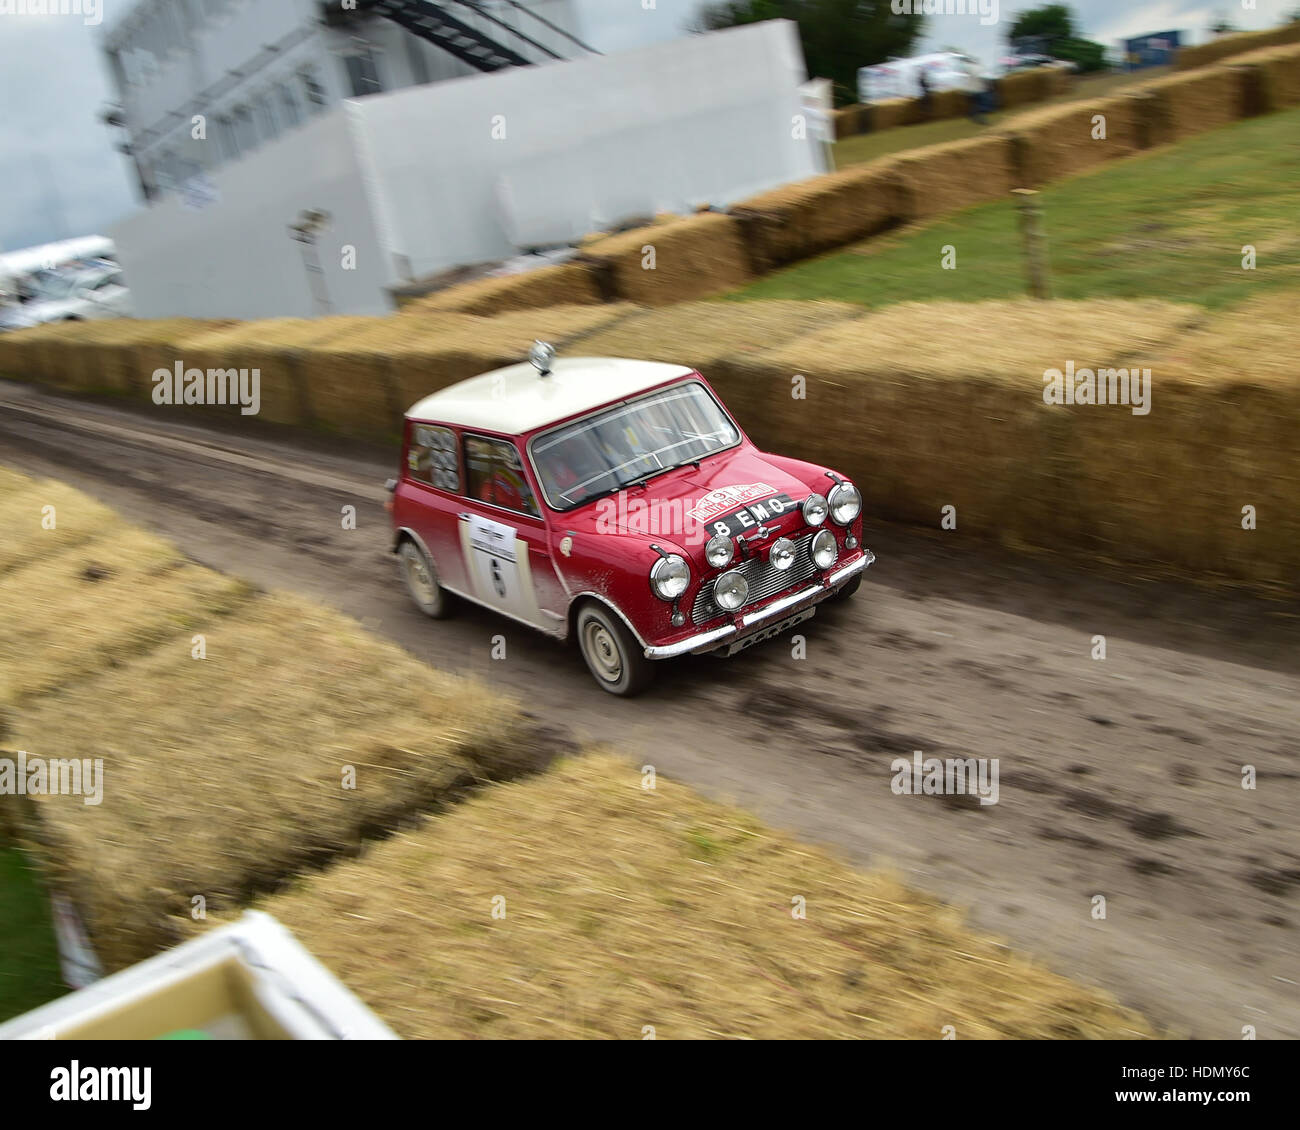 Martin James, Peter Smith, Morris Mini Cooper S, Goodwood Festival of Speed, 2016. automobiles, cars, entertainment, Festival of Speed, Forest rally s Stock Photo